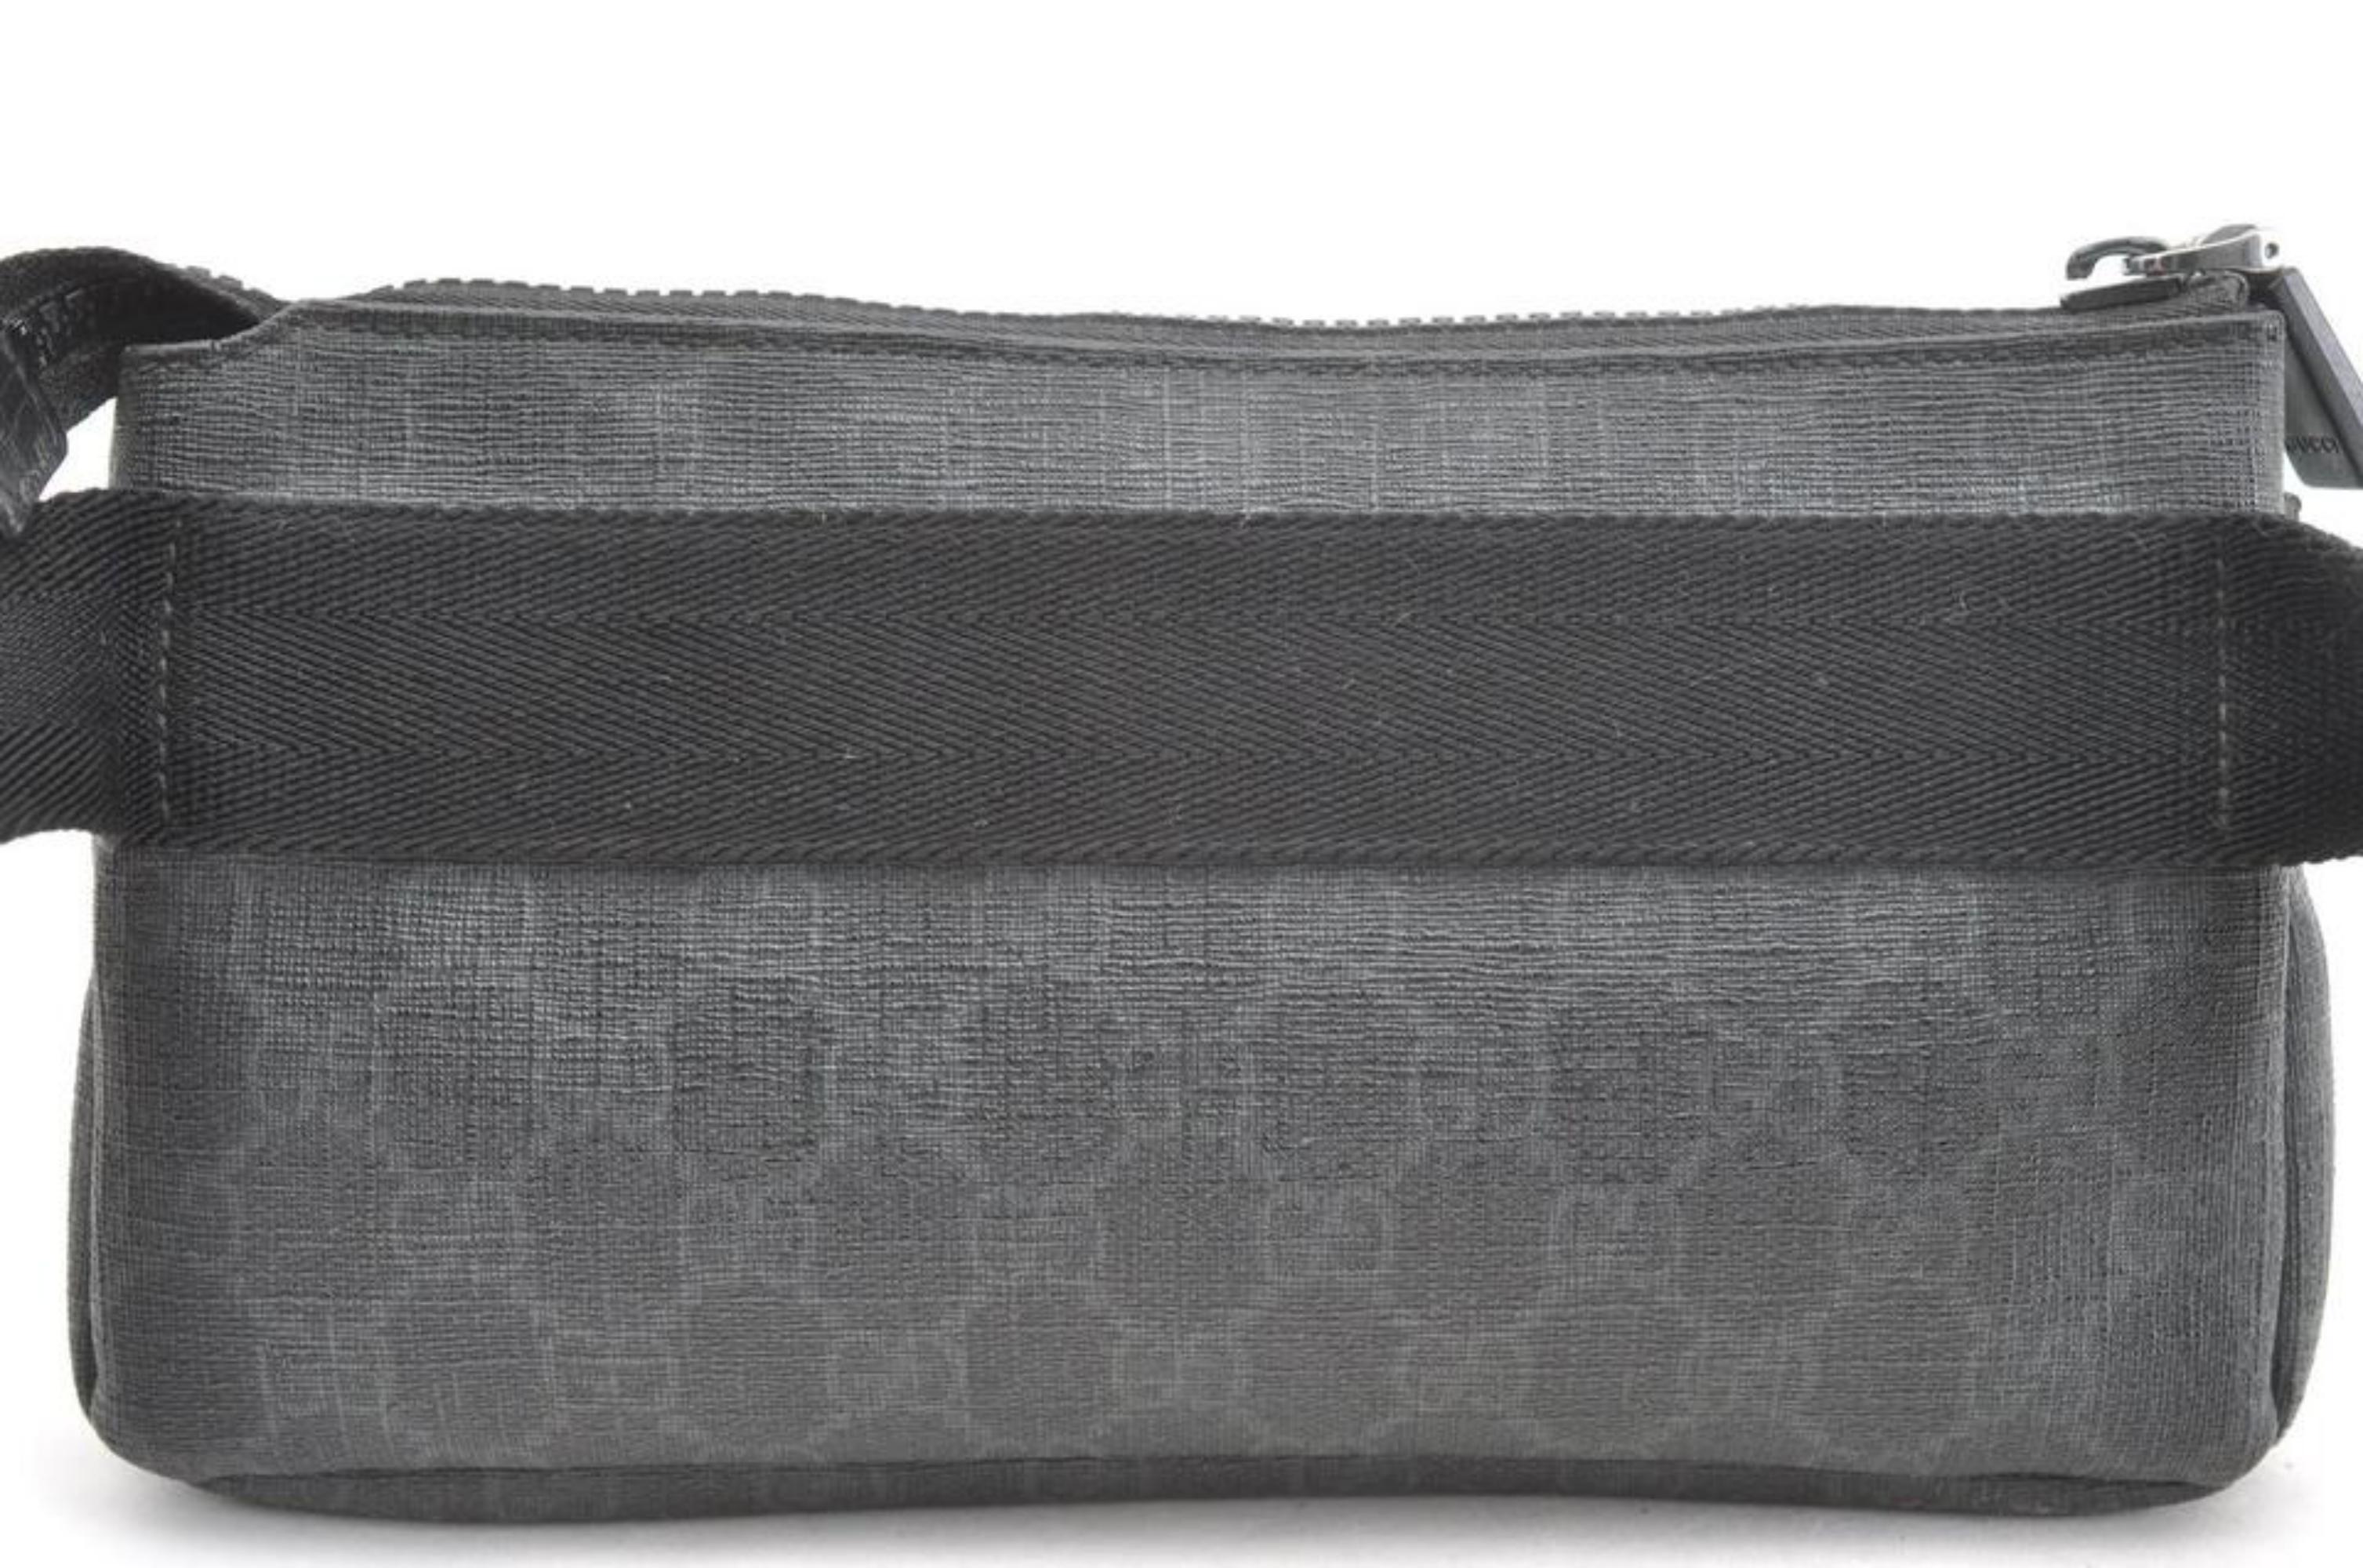 Gucci Supreme Waist Belt Pouch 866920 Black Coated Canvas Cross Body Bag For Sale 2